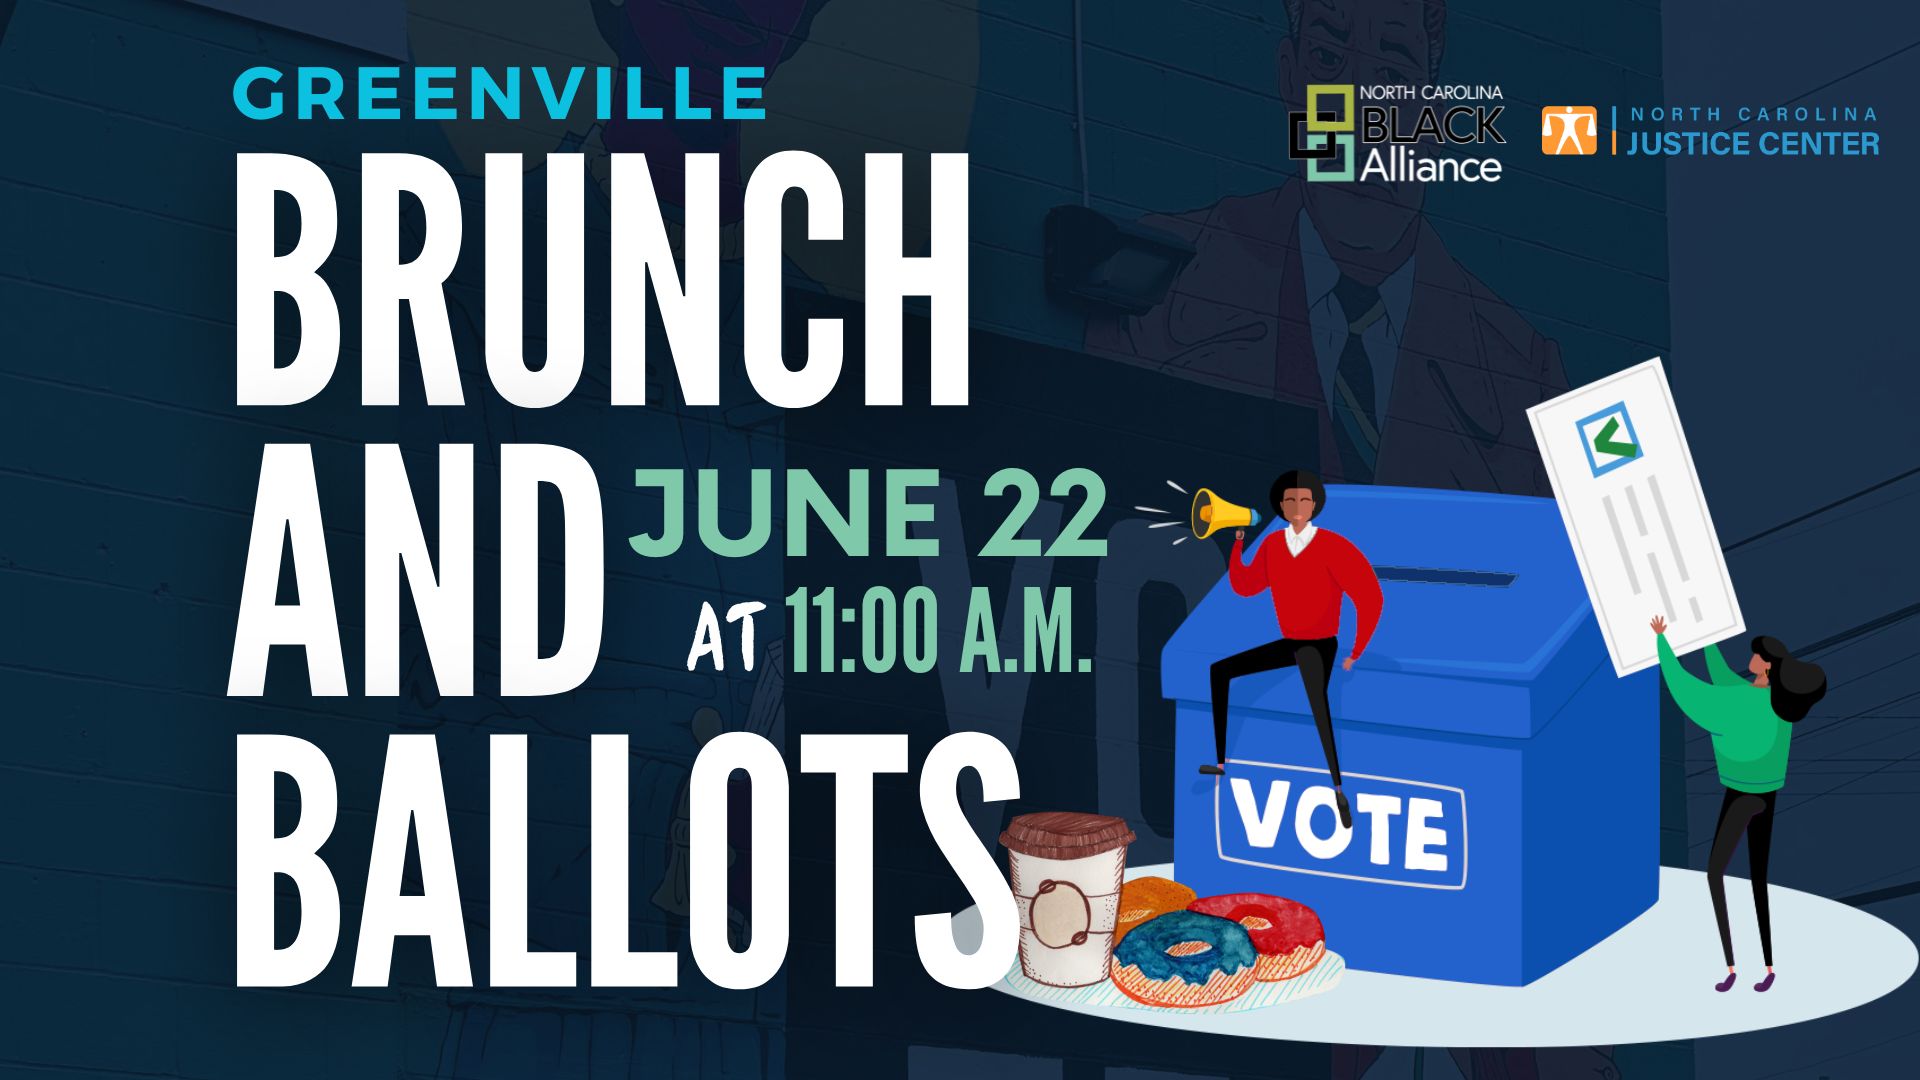 Brunch and Ballots on June 22 at 11 am in Greenville